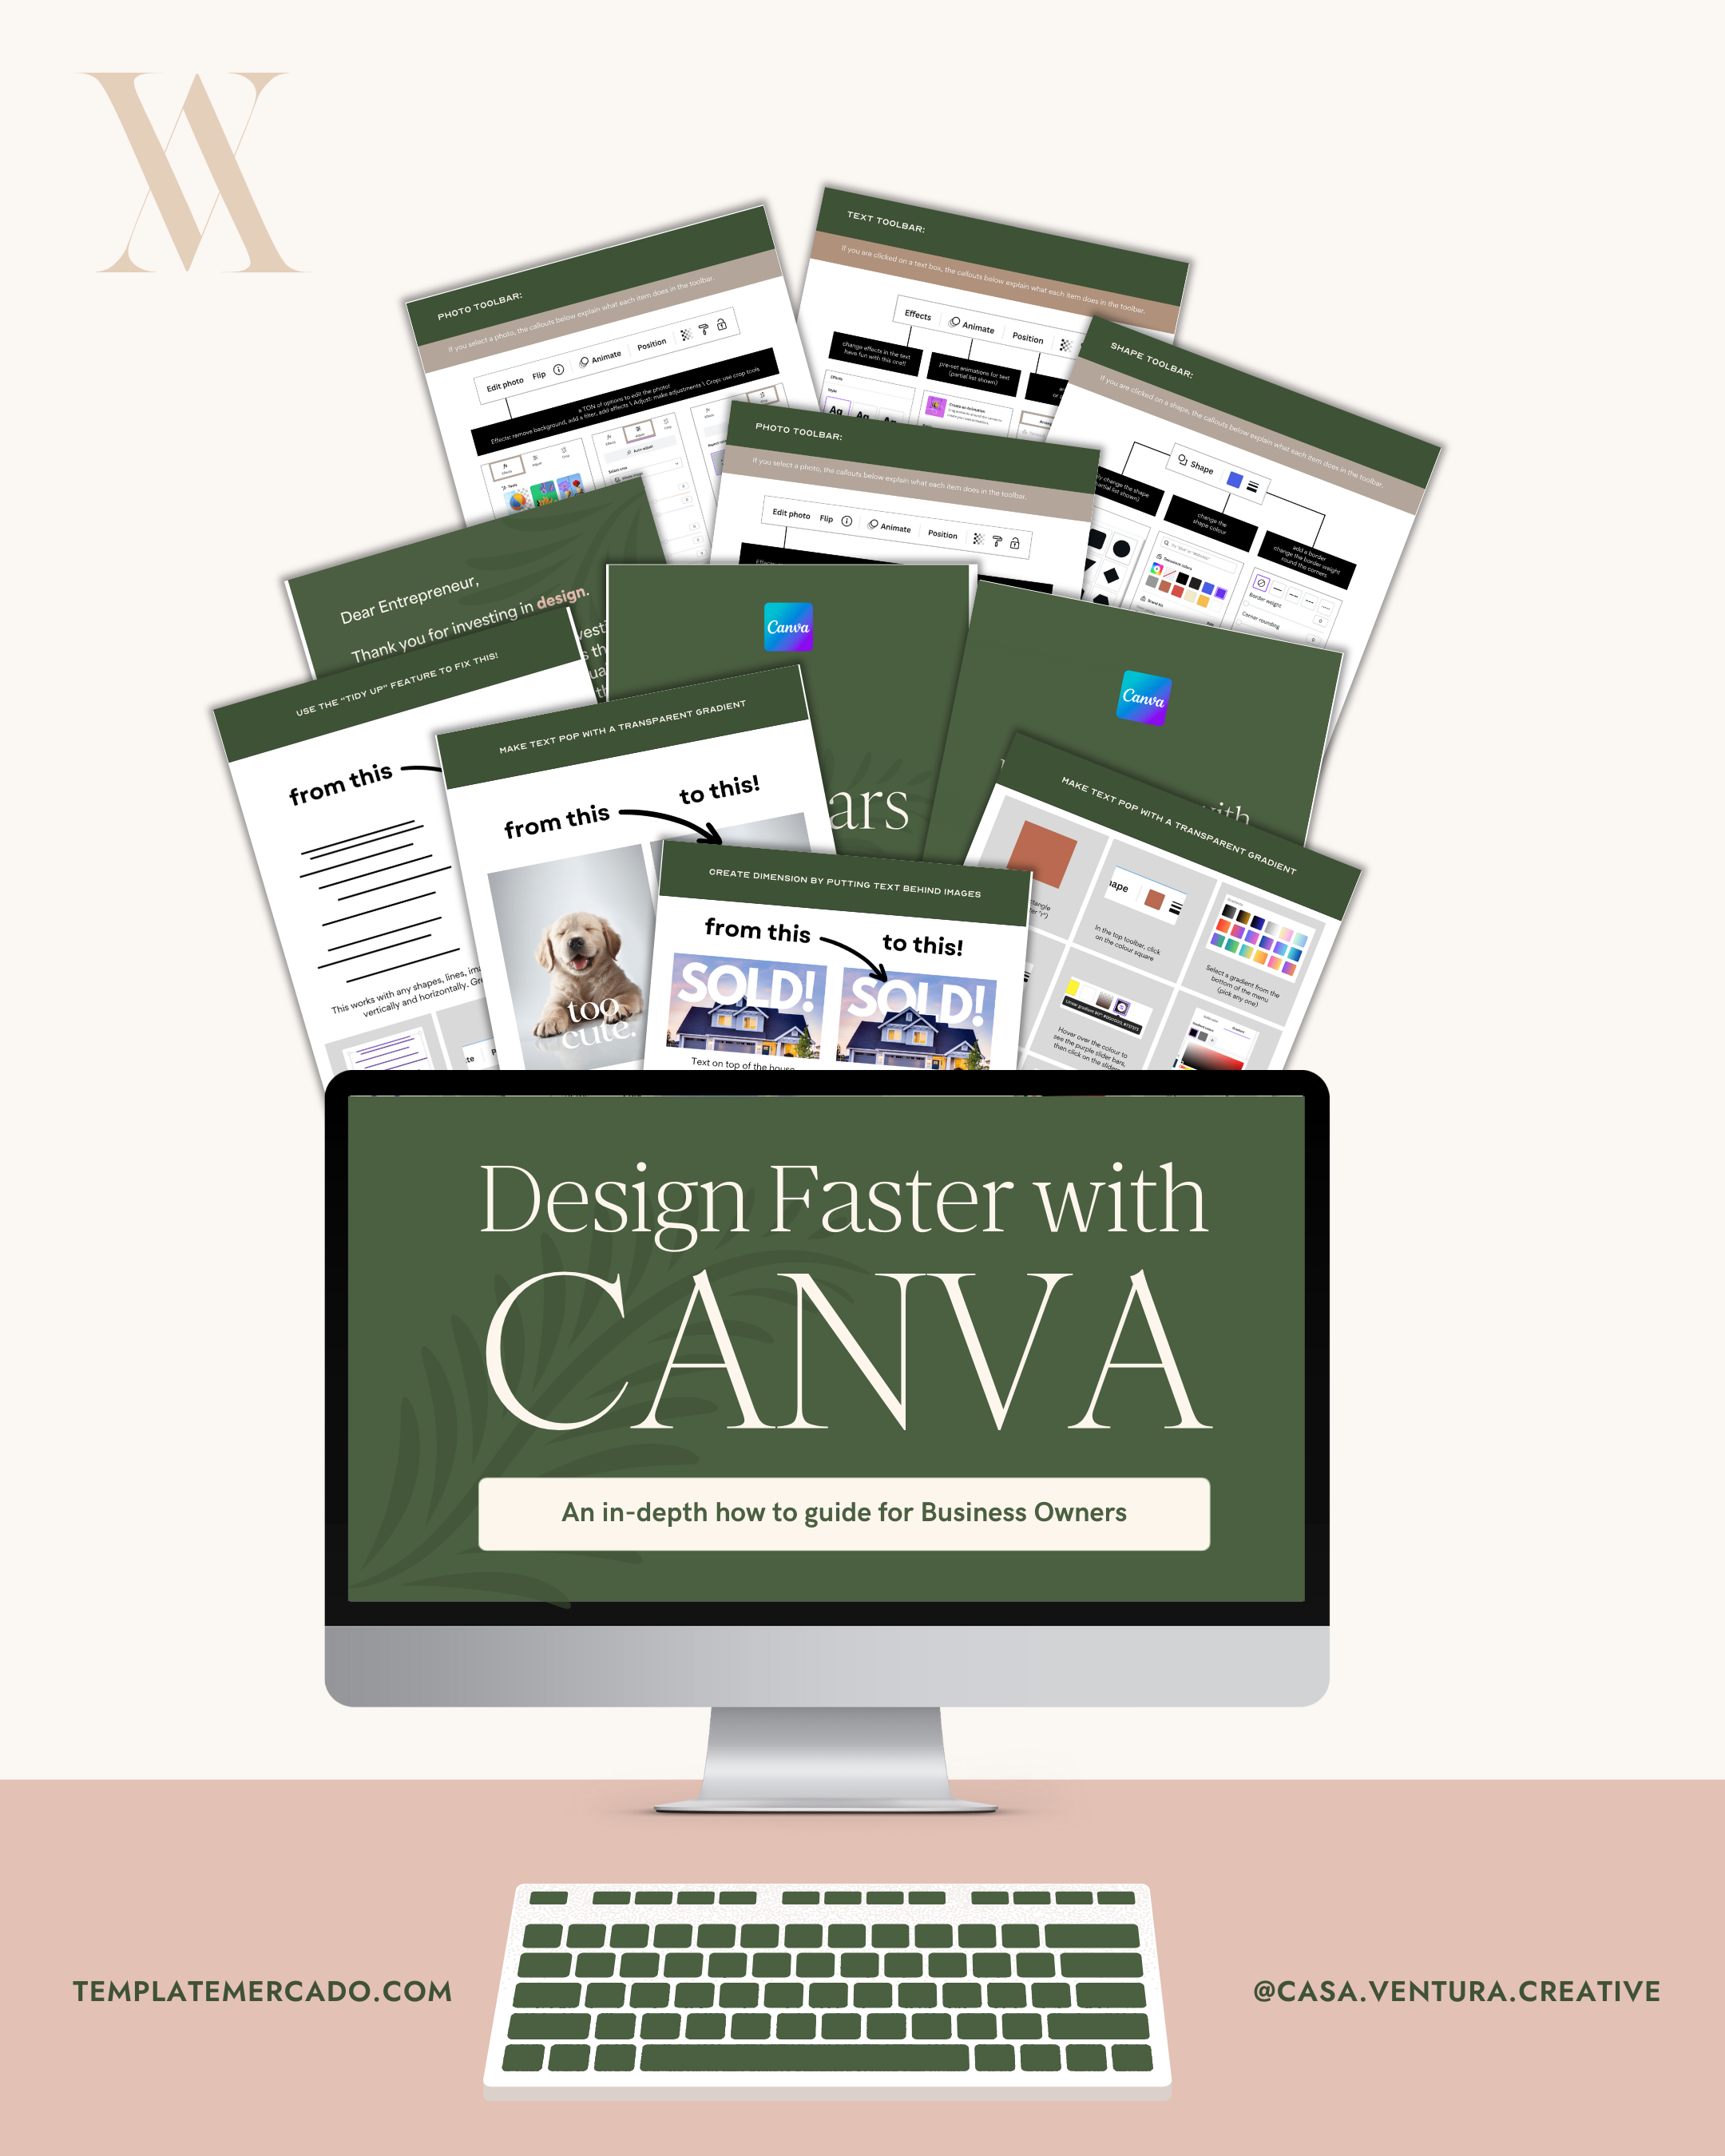 Design Faster With Our Canva Guide – Canva How To Guide for Business Owners - templatemercado